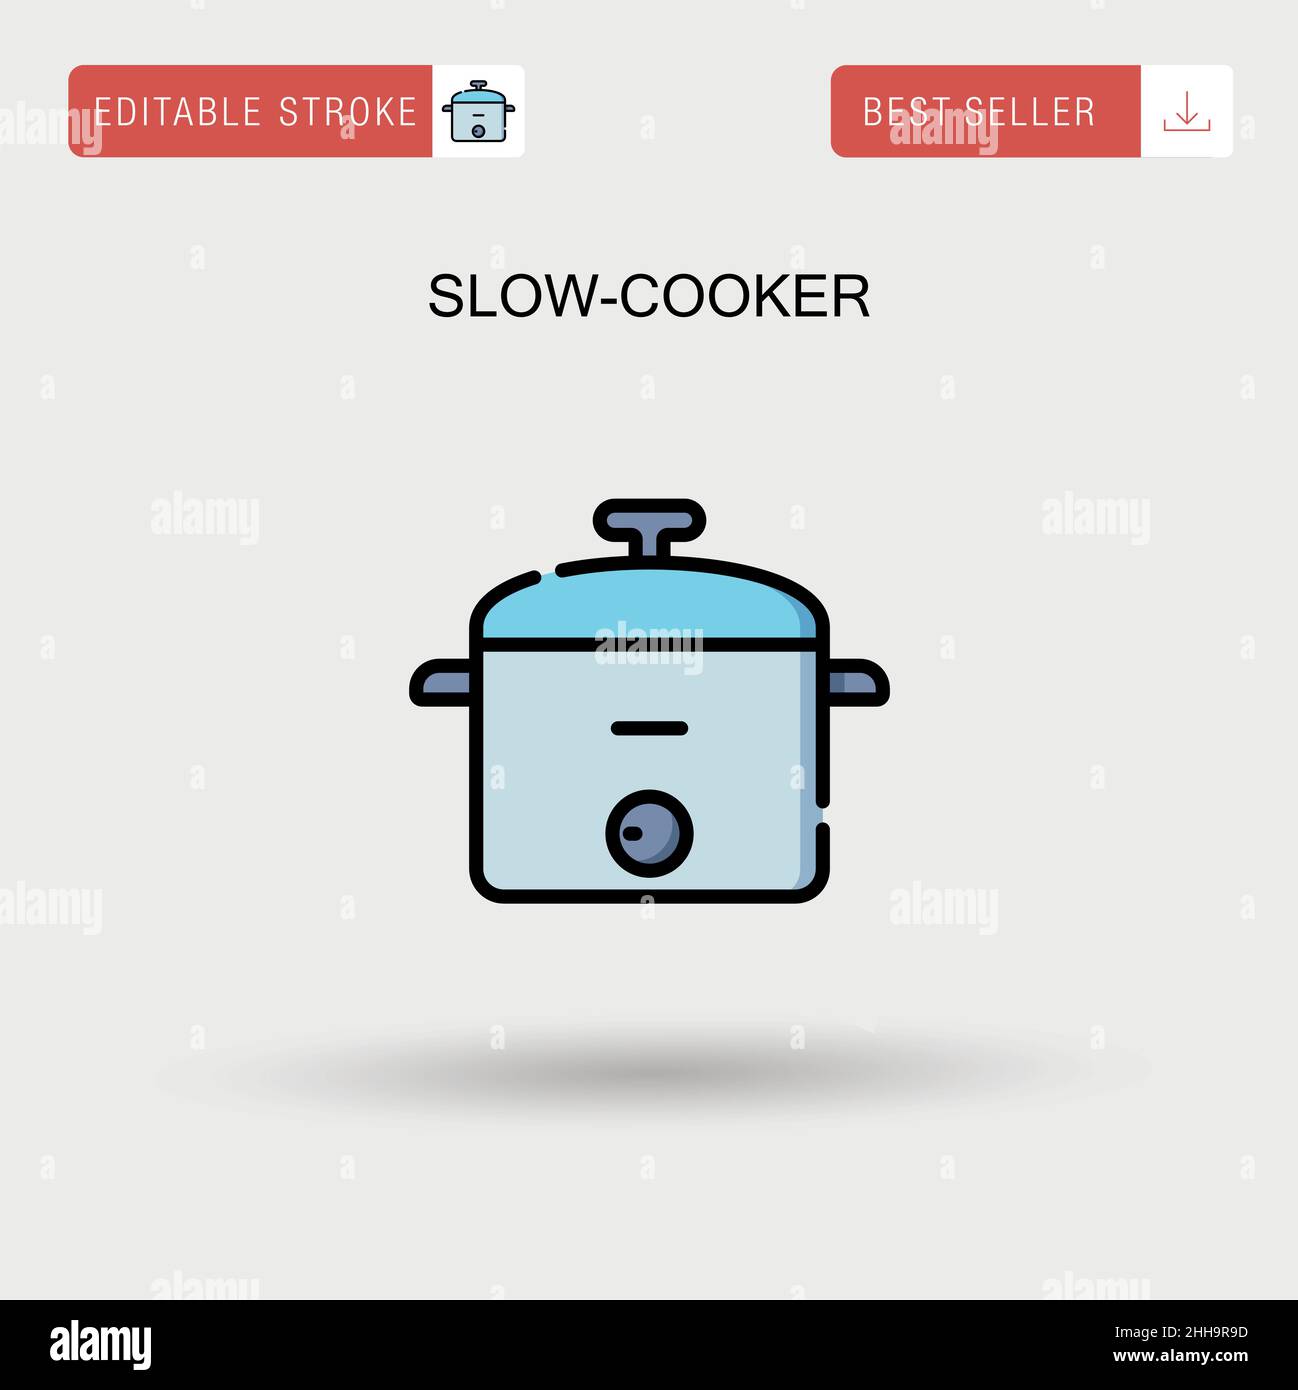 Slow-cooker Simple vector icon. Stock Vector